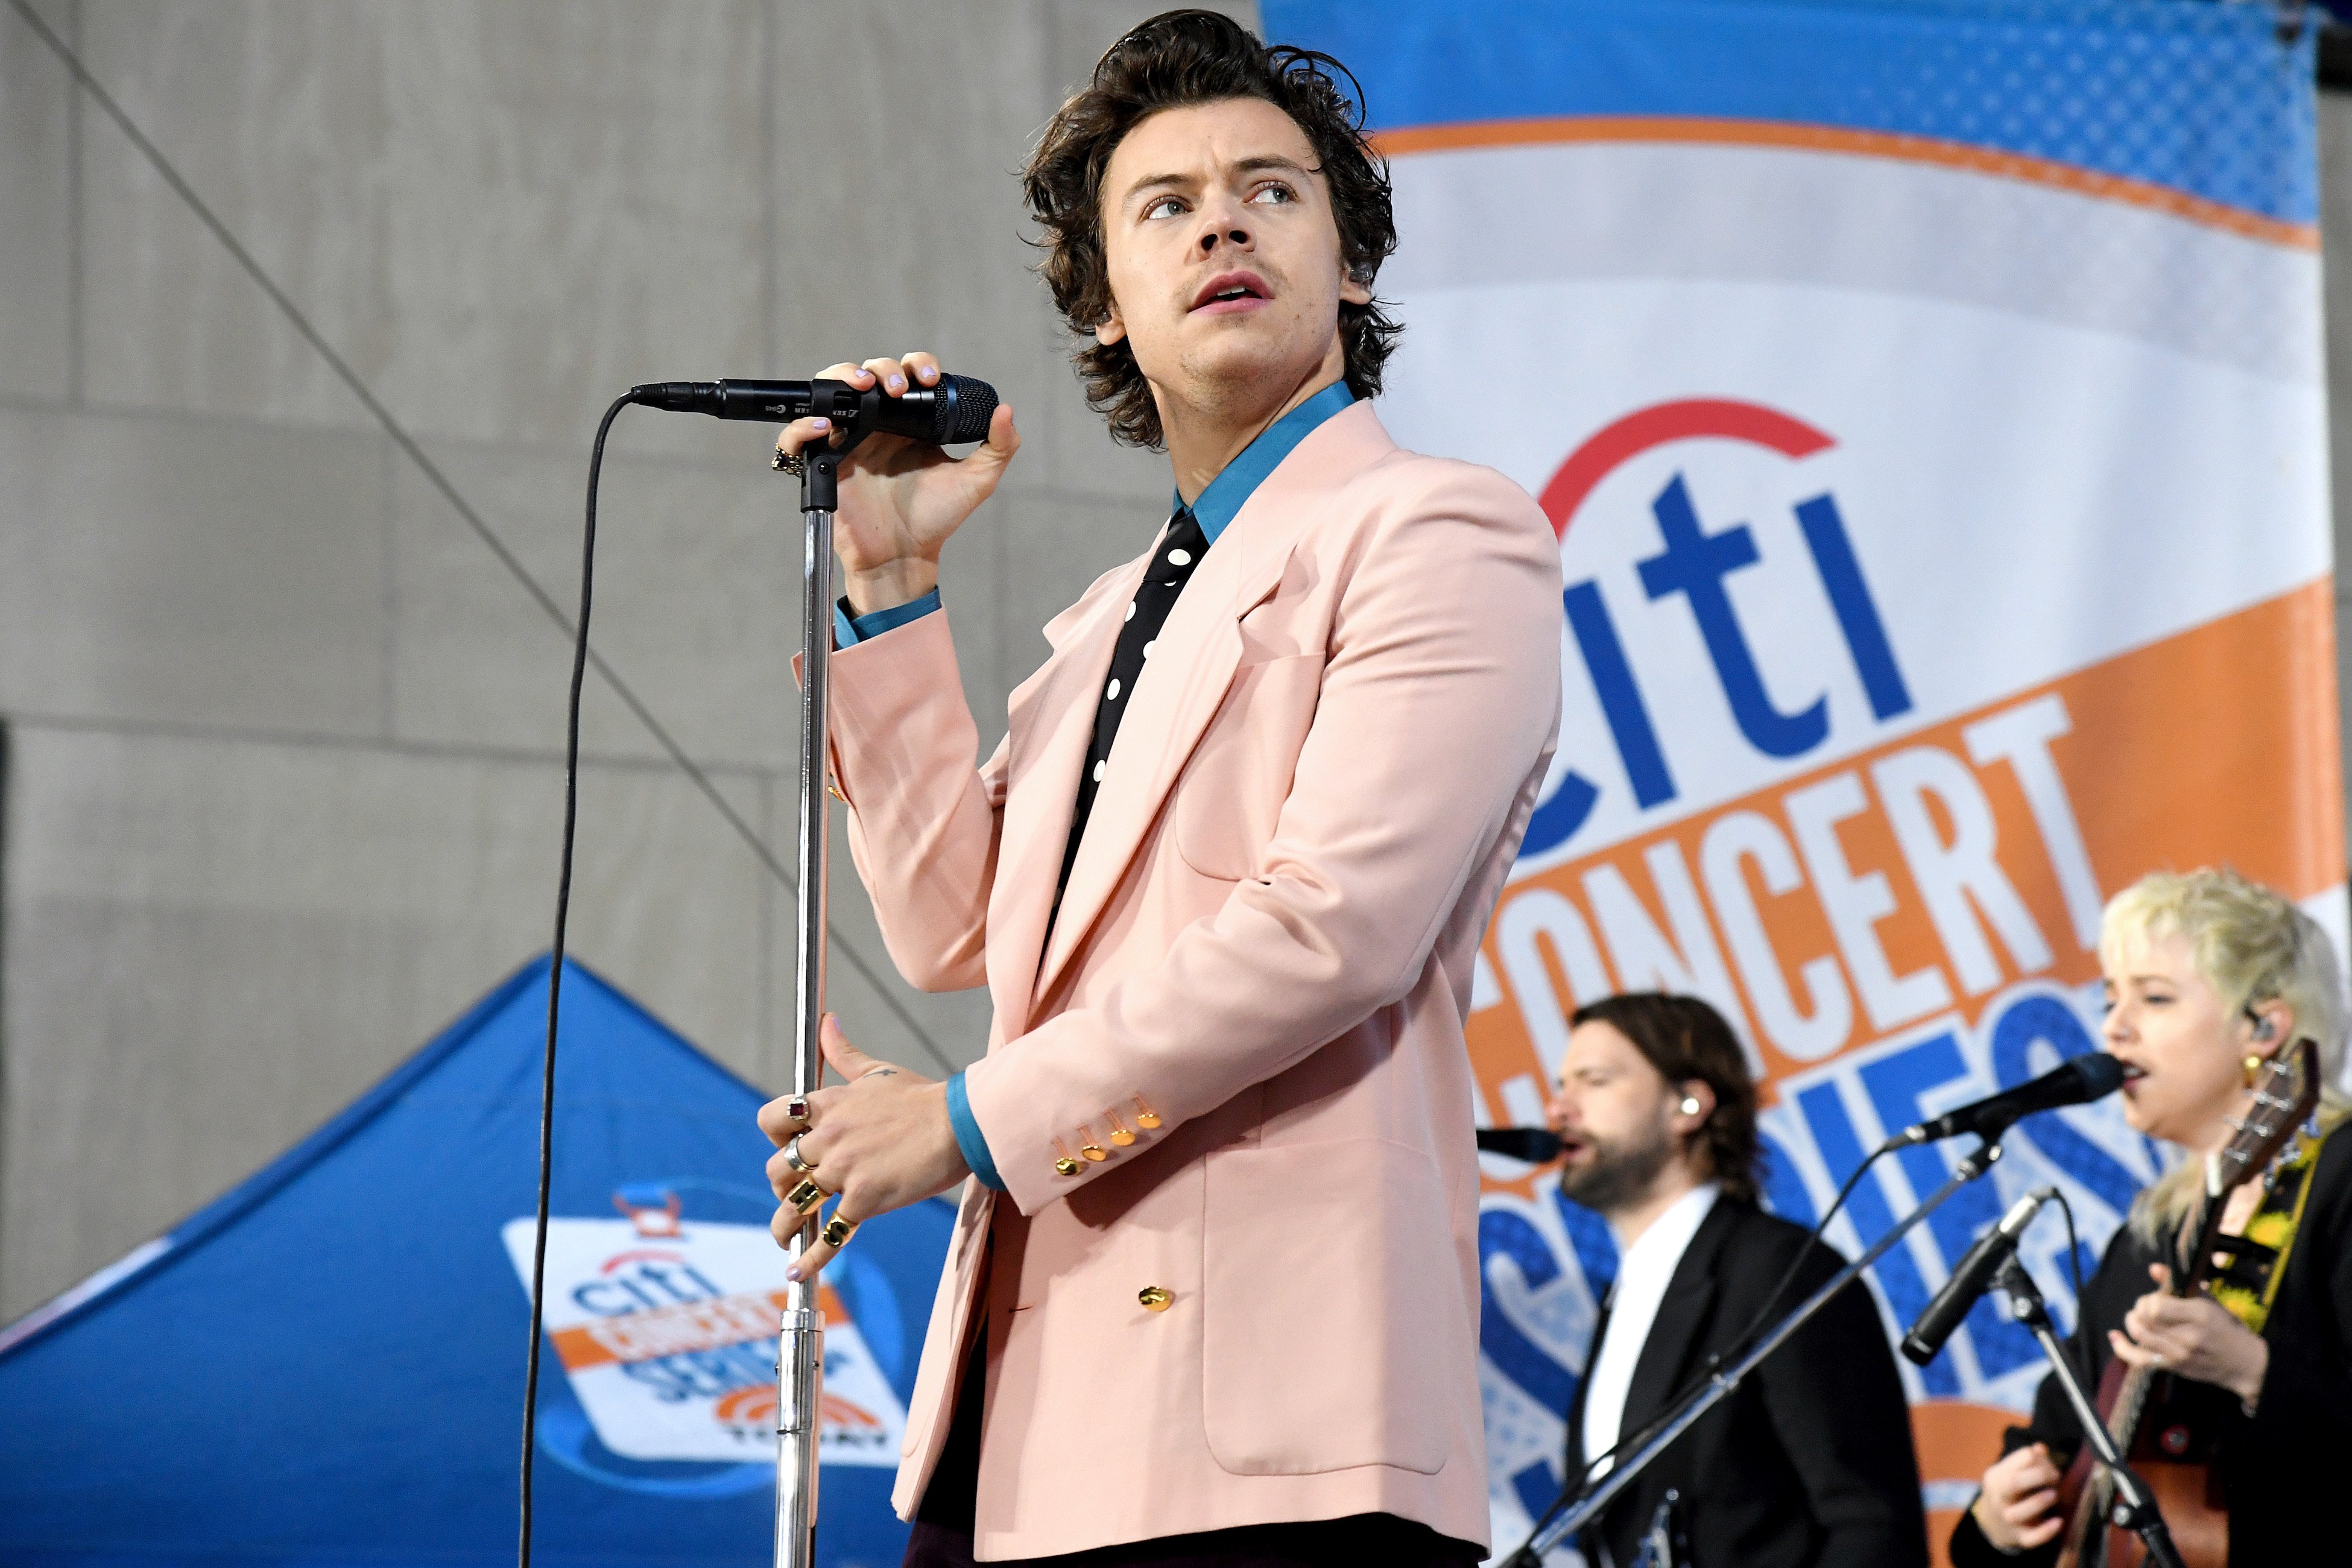 Harry Styles performs onstage during Citi Concert Series on TODAY Presents Harry Styles at Rockefeller Plaza